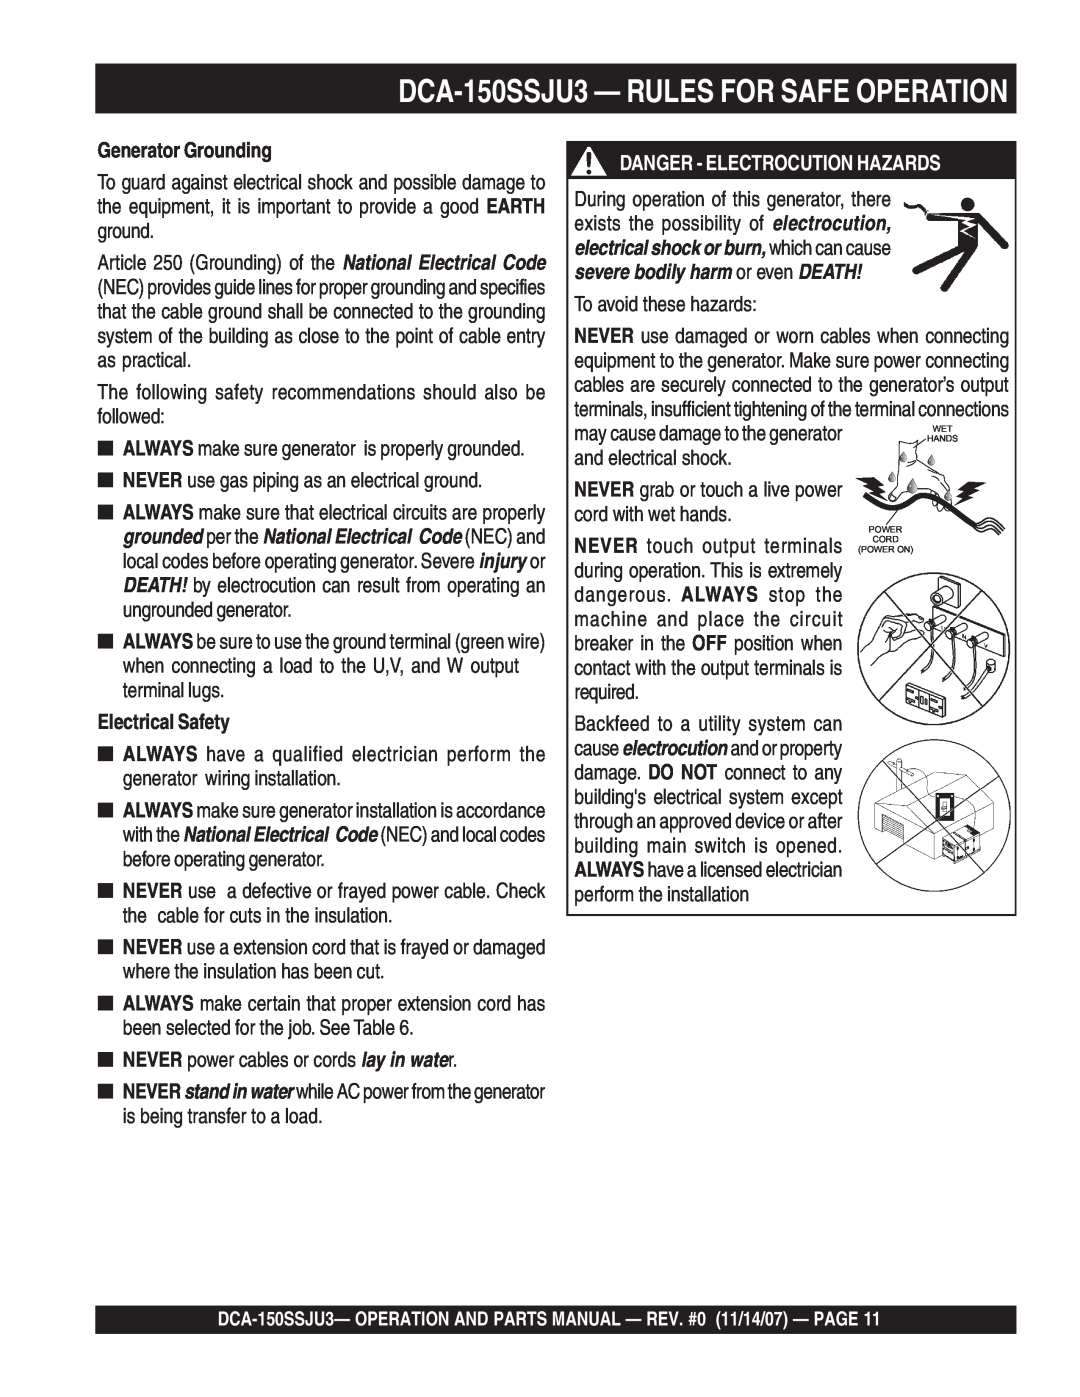 Multiquip operation manual DCA-150SSJU3- RULES FOR SAFE OPERATION, Generator Grounding, Electrical Safety 